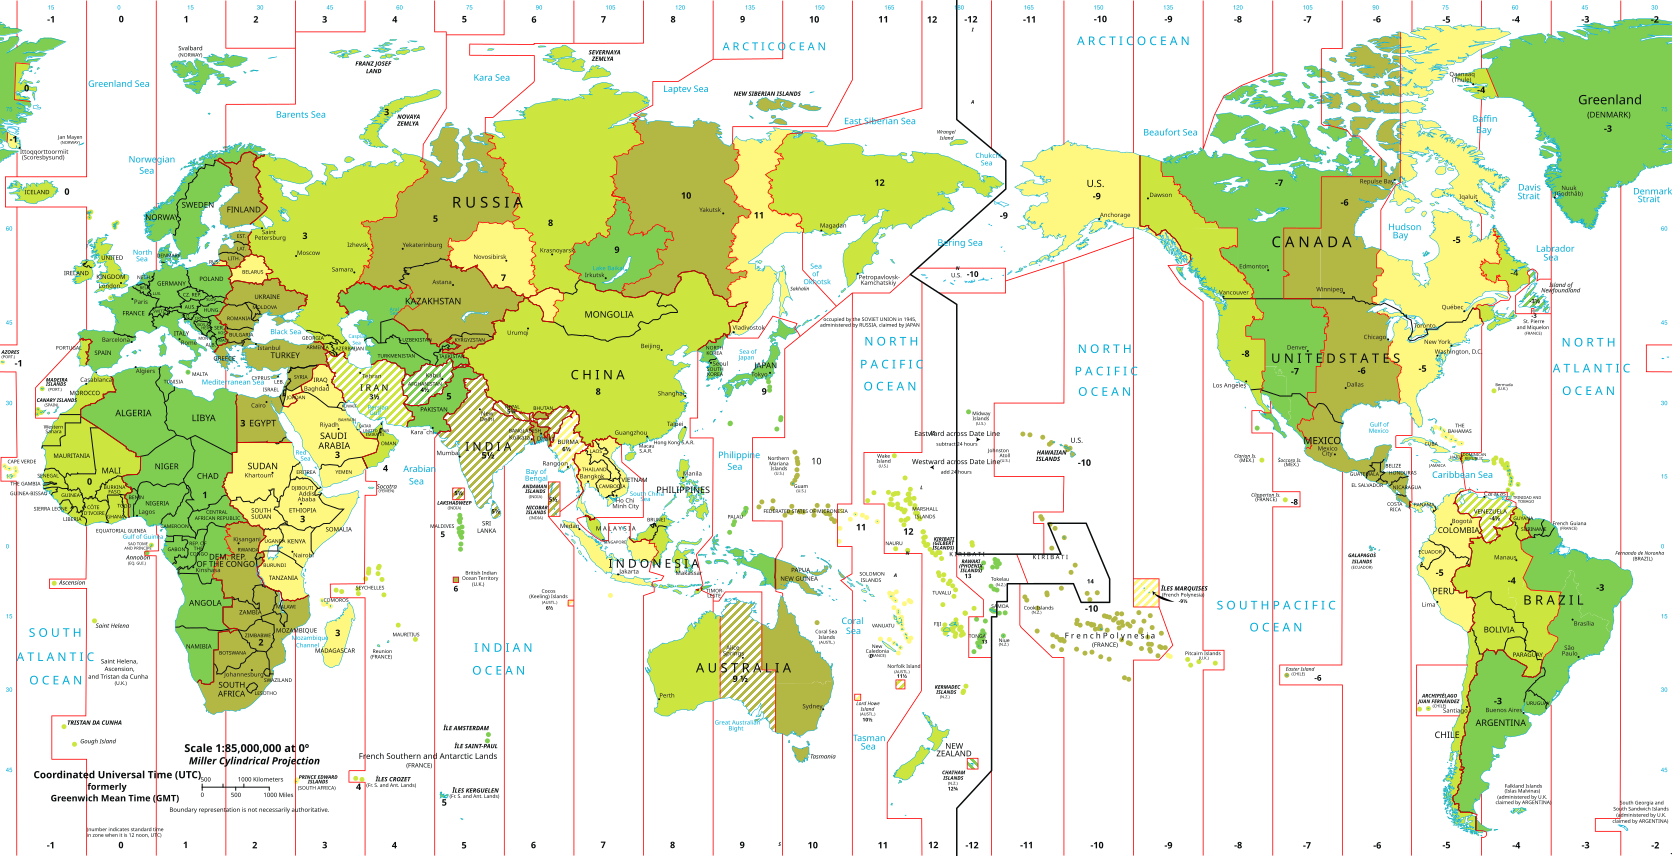 1672px-Standard_time_zones_of_the_world_%282012%29_-_Pacific_Centered.svg.png